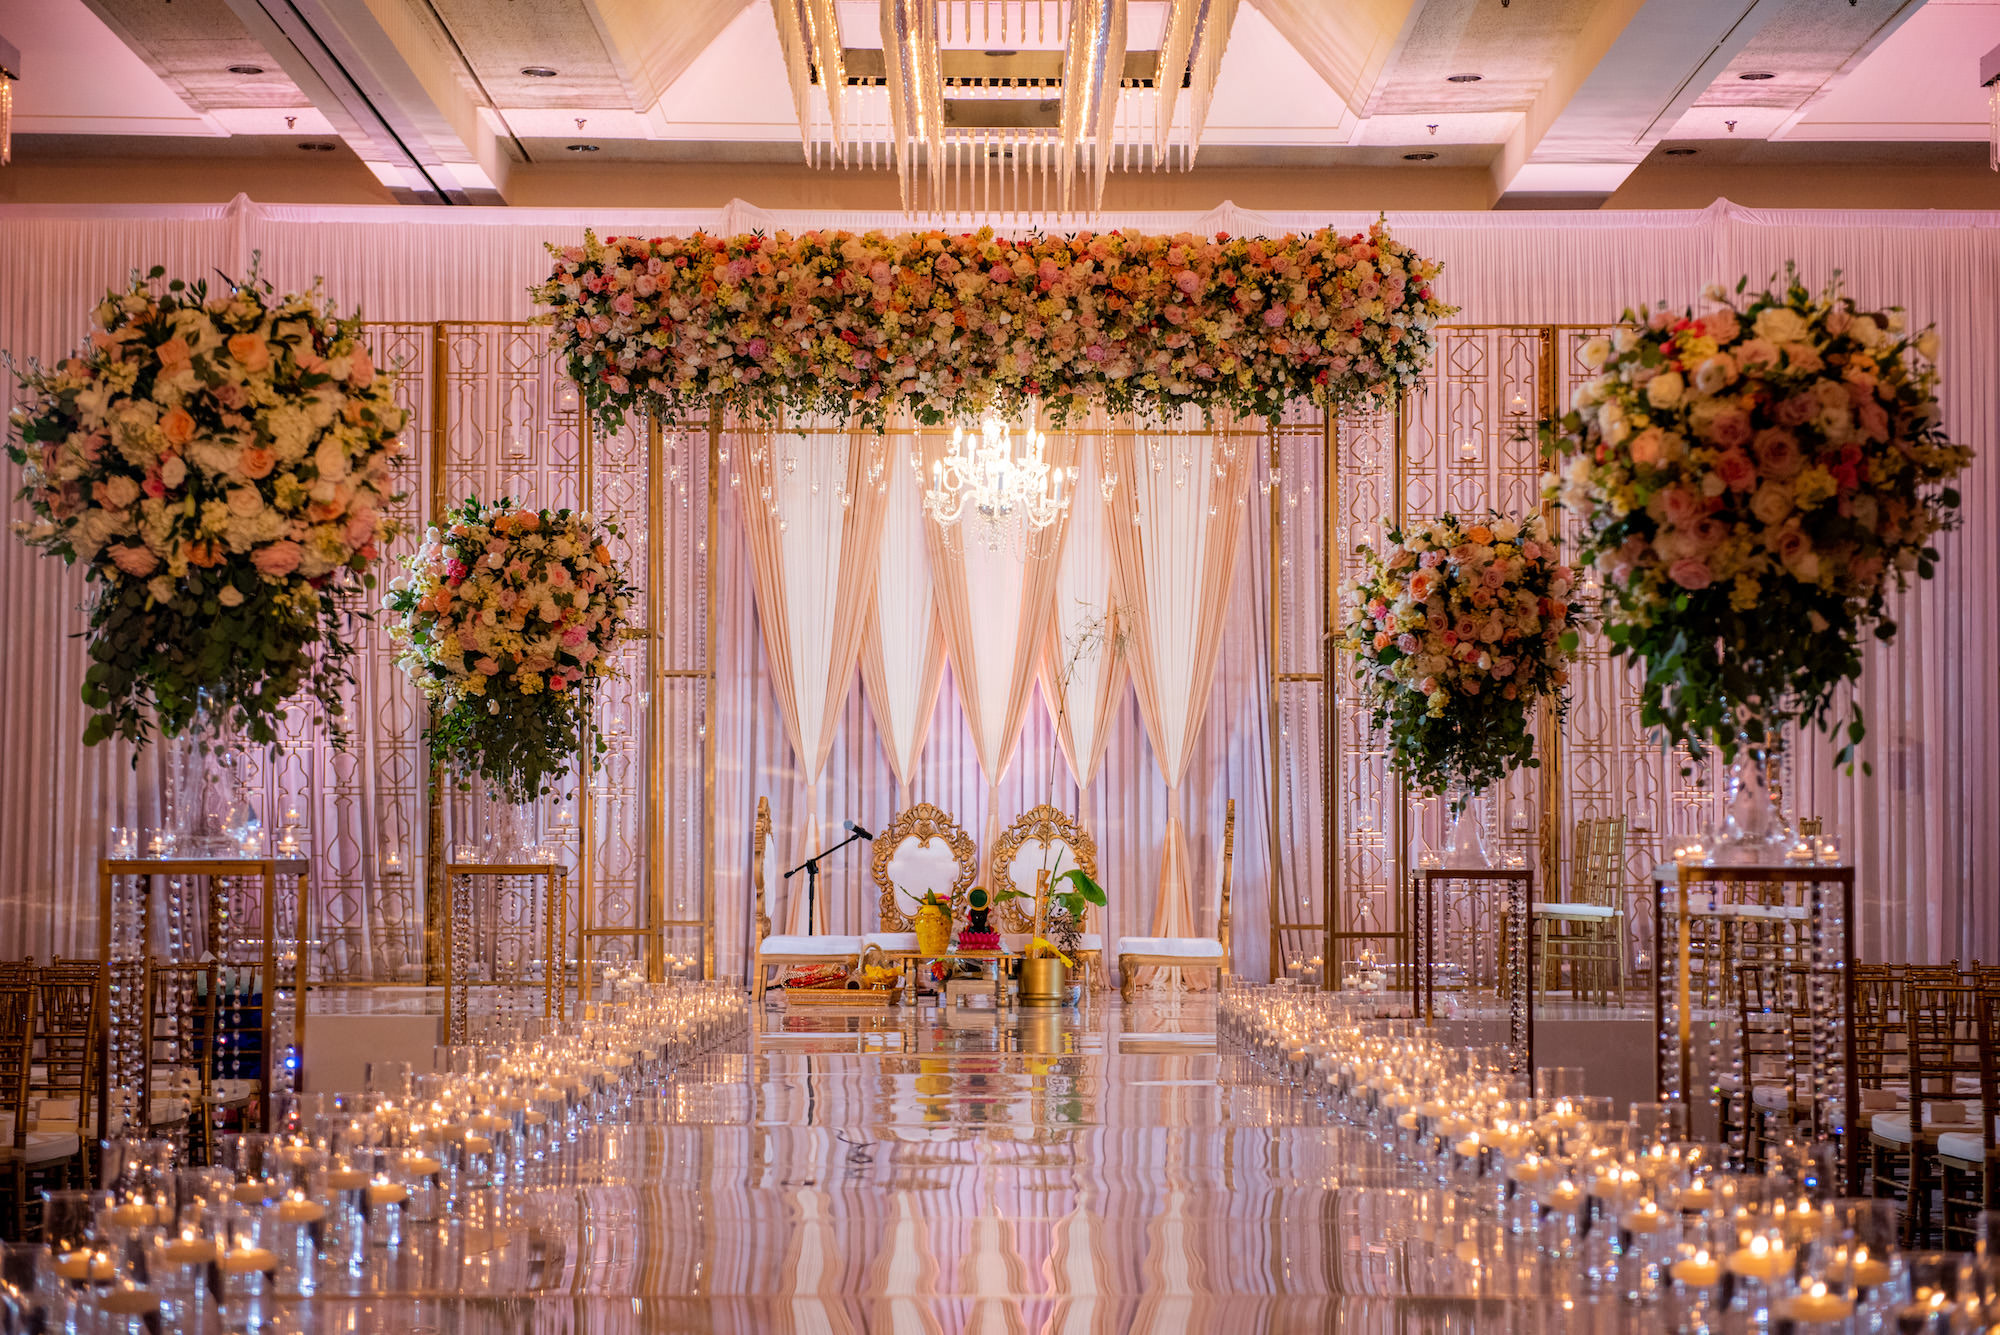 Luxurious Ballroom Wedding Ceremony, Indian Altar with Ornate Gold Chairs and Chandelier, Lush Floral Arrangements with Blush Pink and White Flowers, Candlelight Path Down Aisle | Tampa Bay Wedding Venue Hilton Downtown Tampa